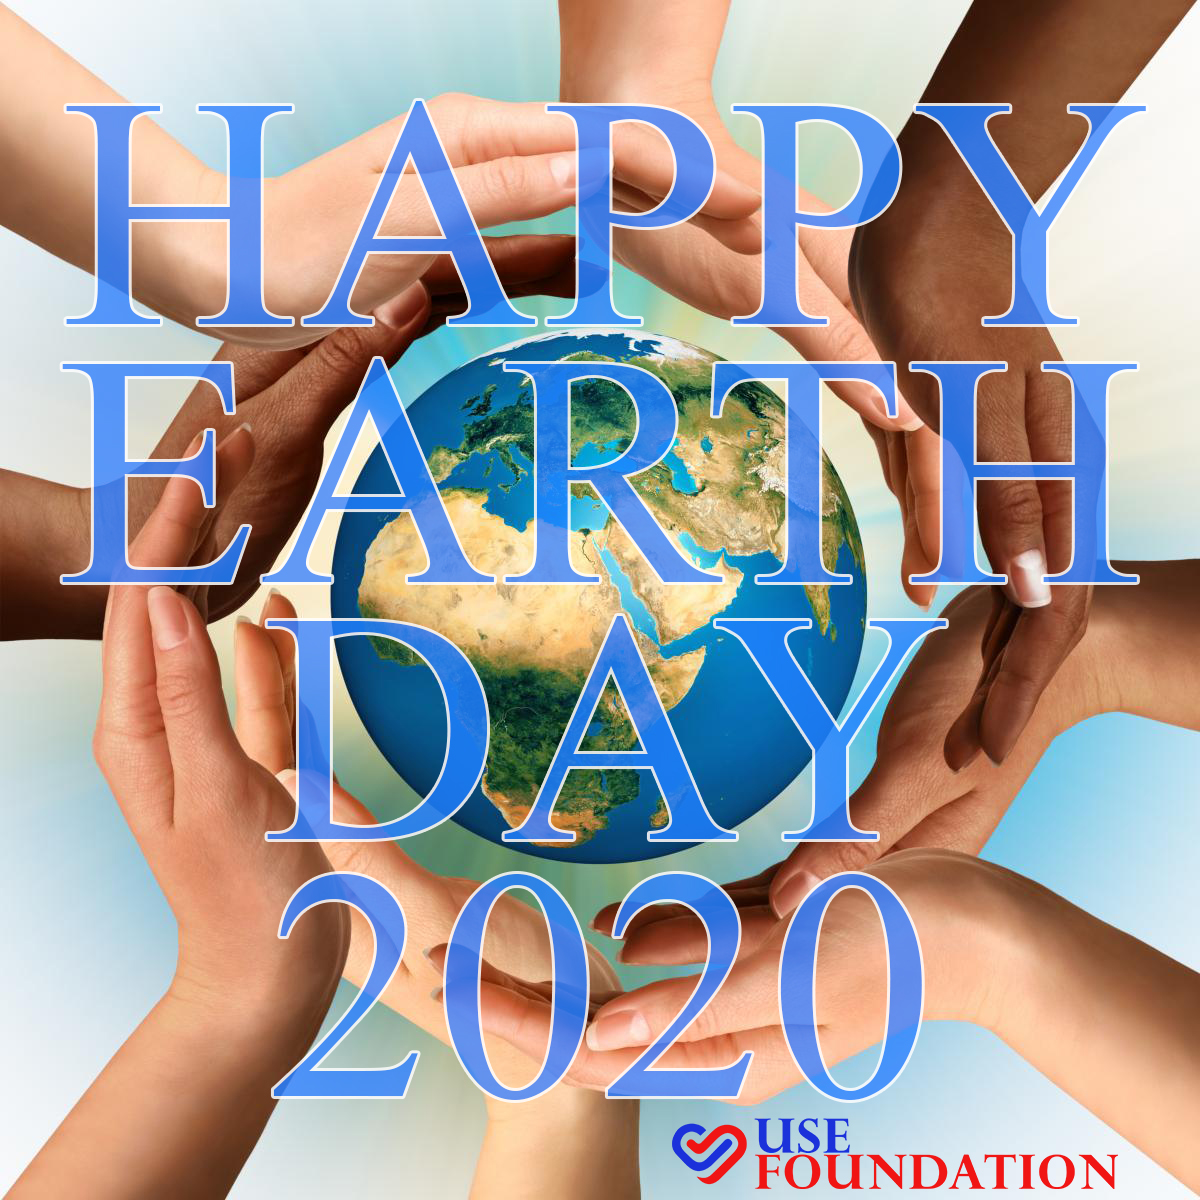 Happy Earth Day 2020 Use Foundation